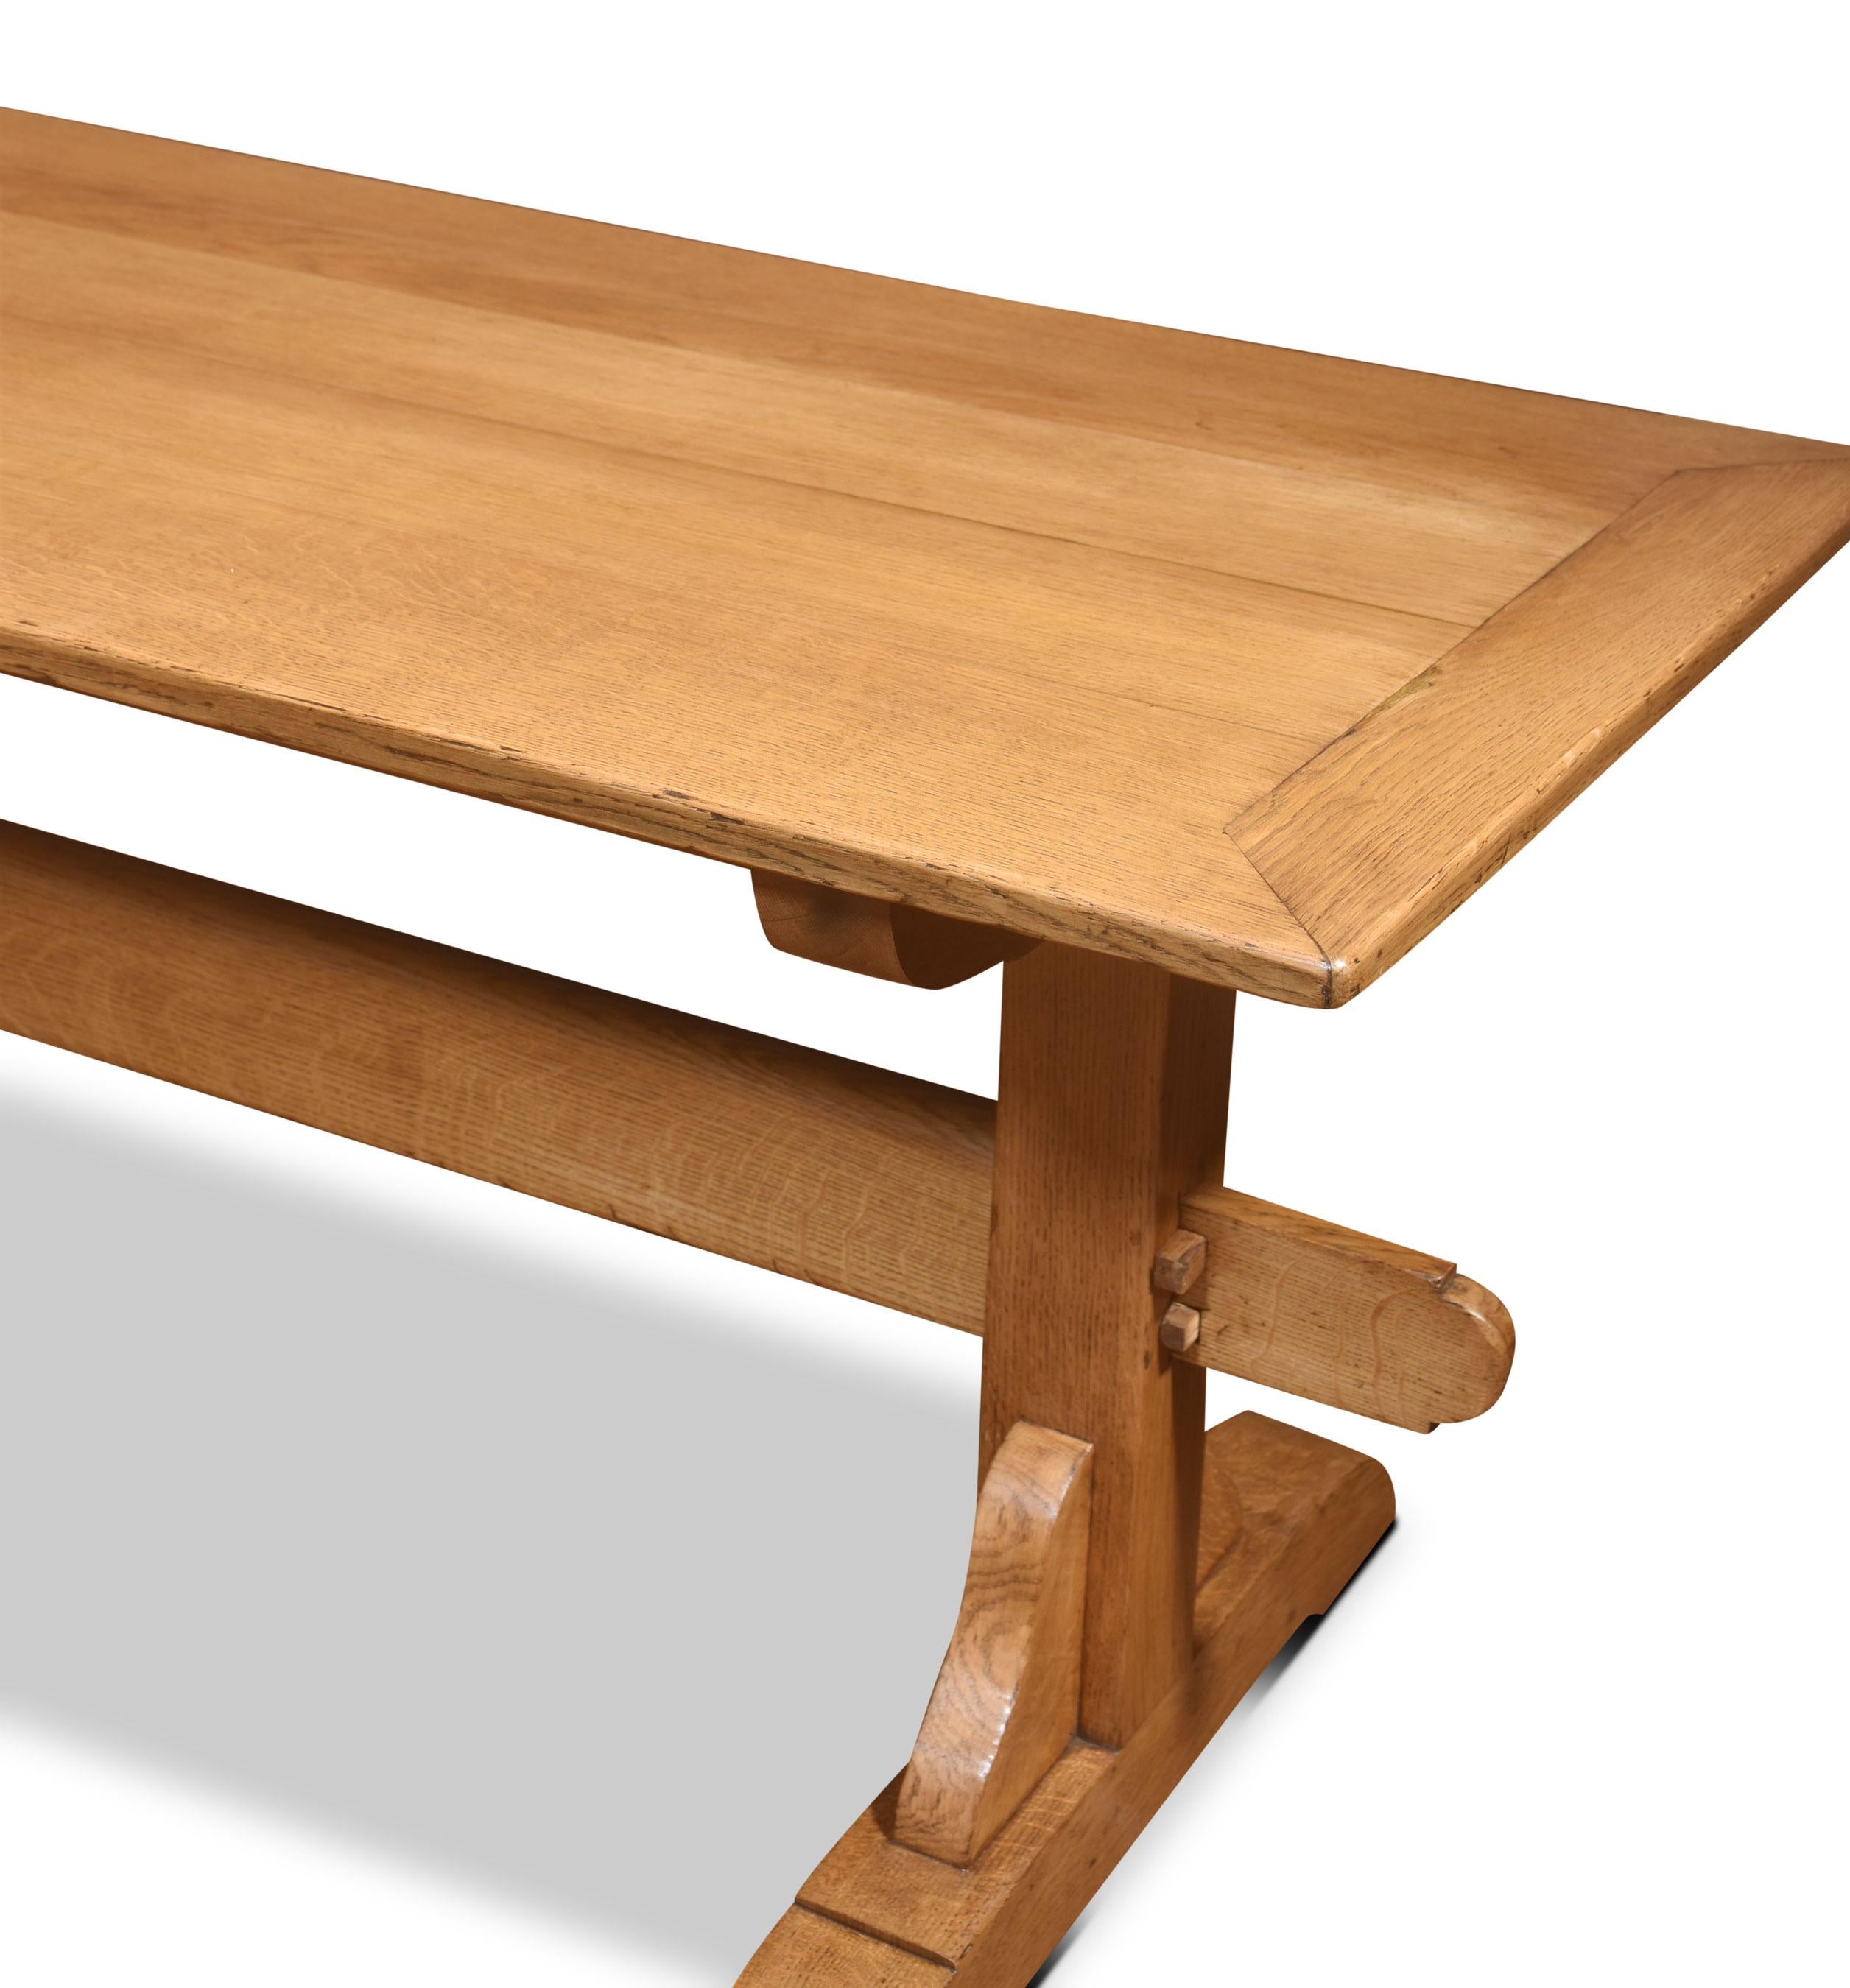 Oak refectory table, the plank top, raised on platform end supports with trestle legs united by stretcher.
Dimensions
Height 30 Inches
Width 96 Inches
Depth 30 Inches